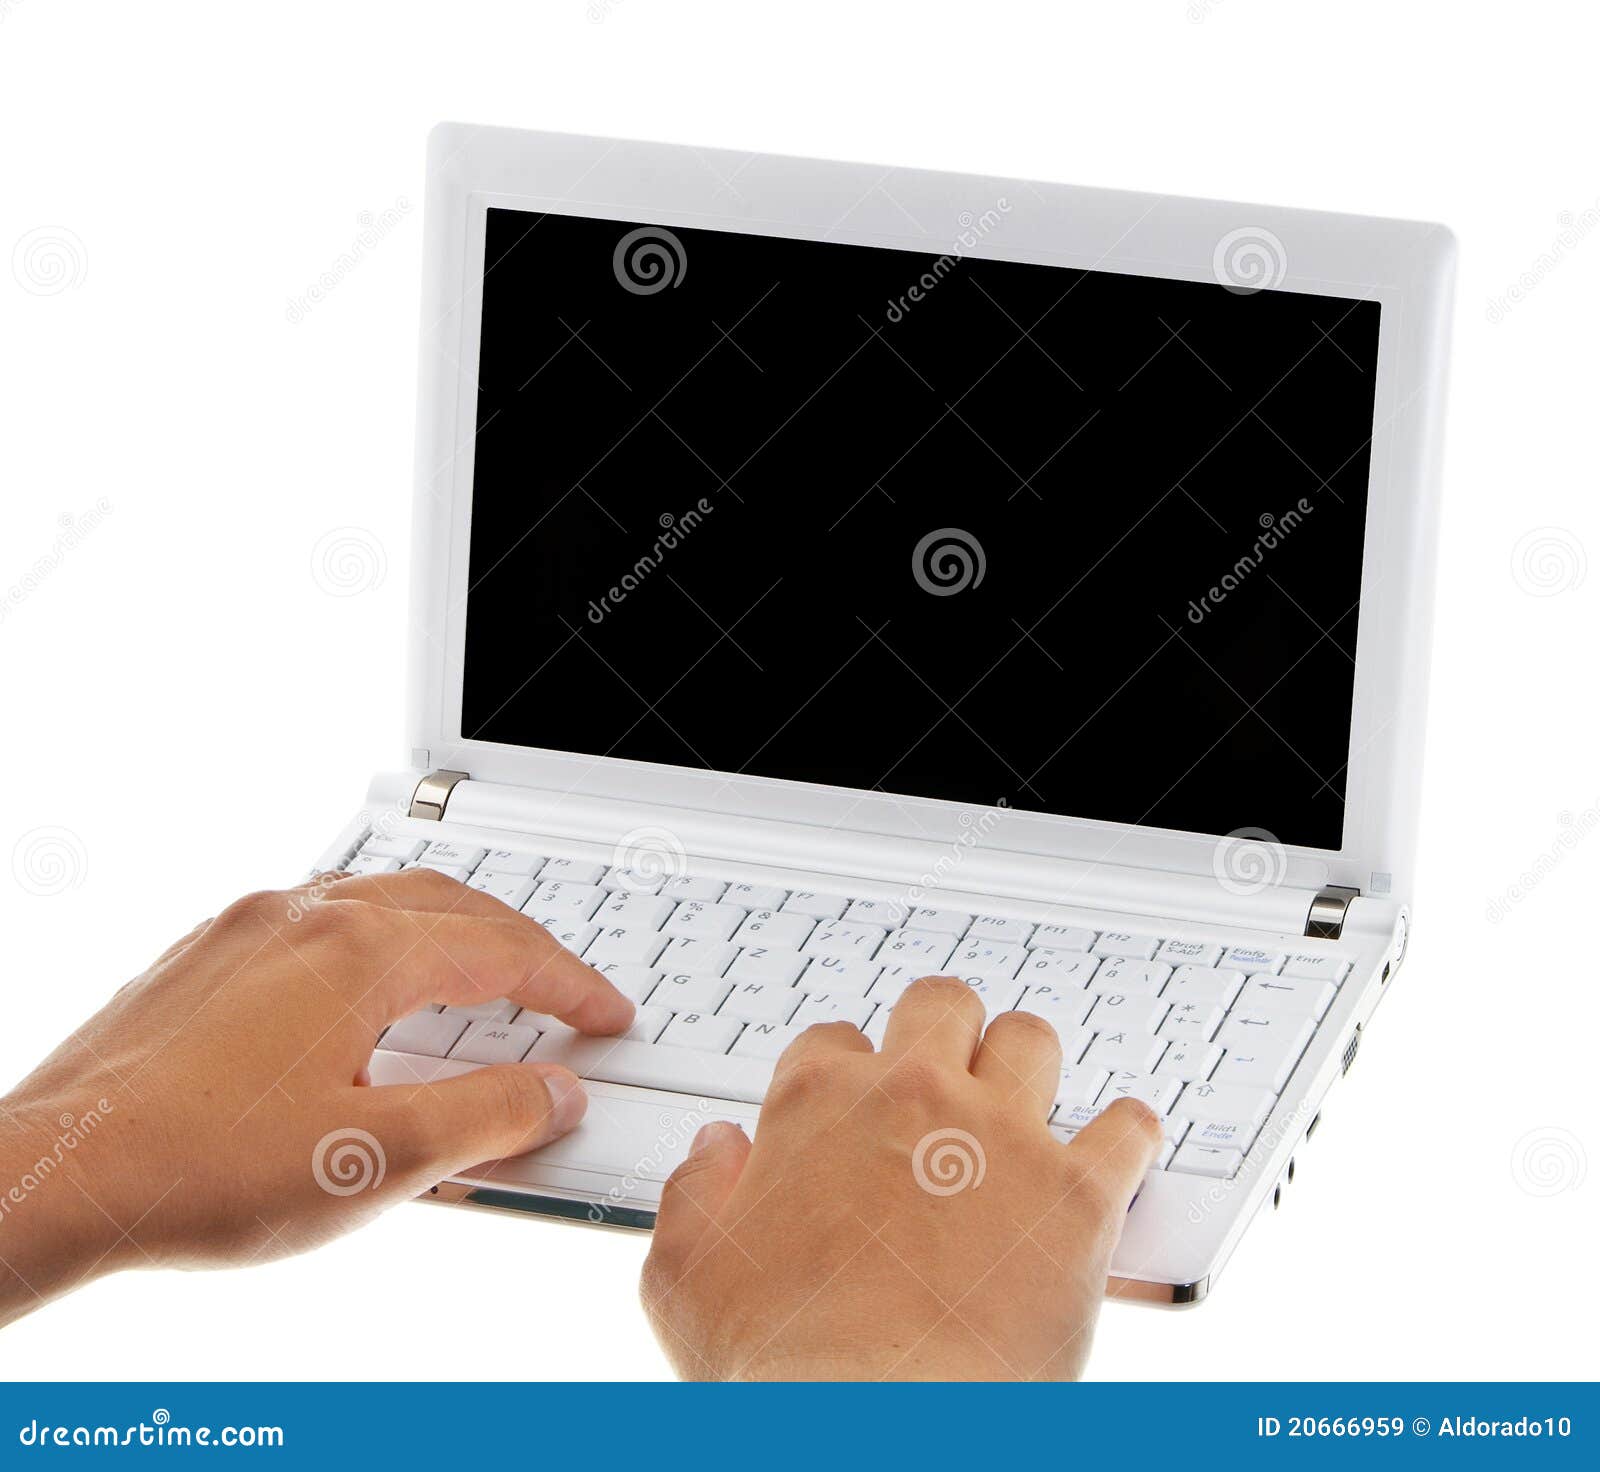 Small White Laptop Computer Royalty Free Stock Images - Image: 20666959